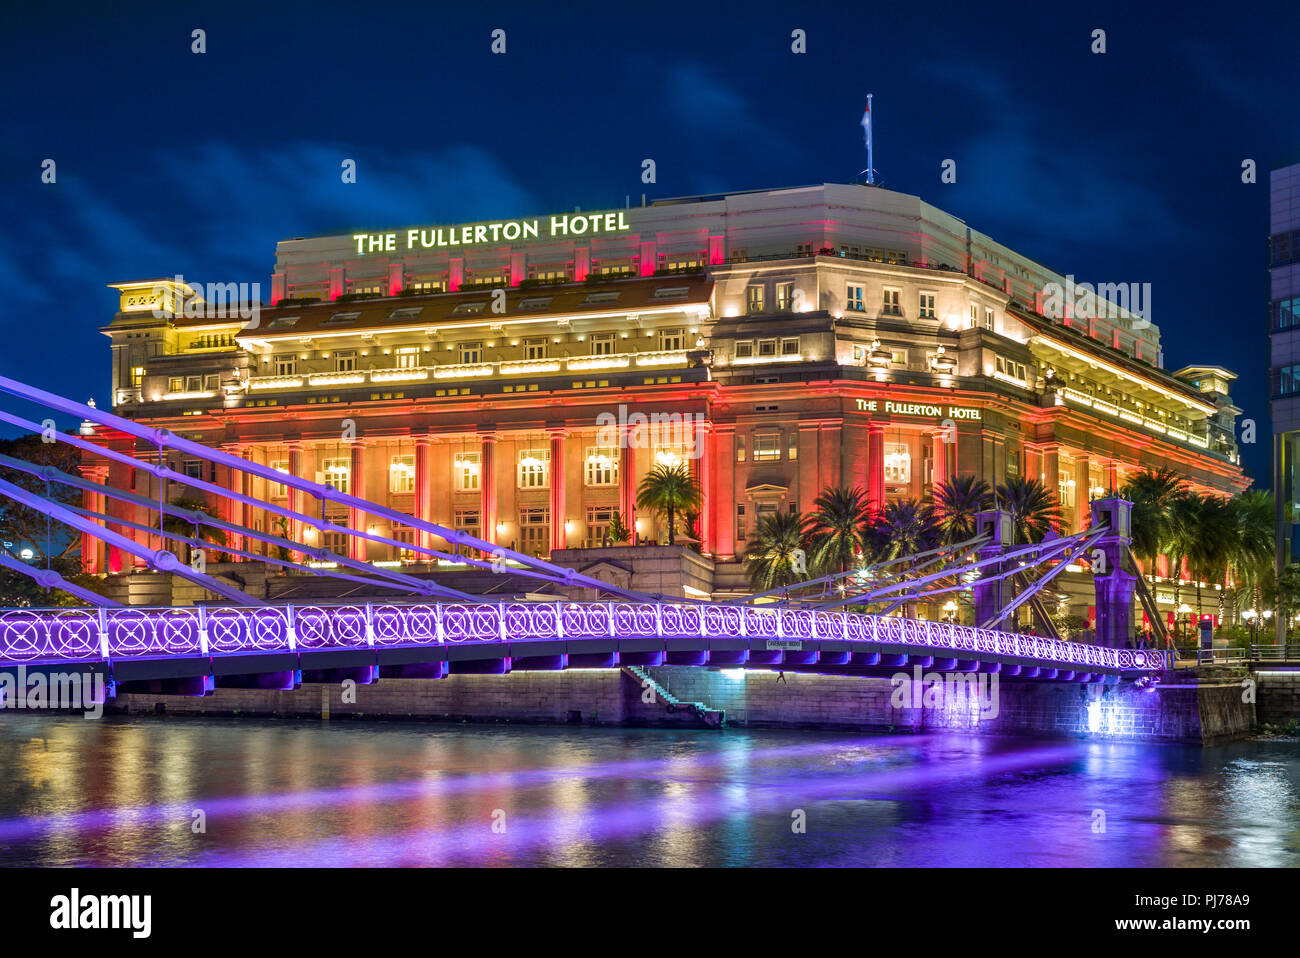 Singapore - August 8, 2018: The Fullerton Hotel Singapore is a five-star luxury hotel located near the mouth of the Singapore River Stock Photo